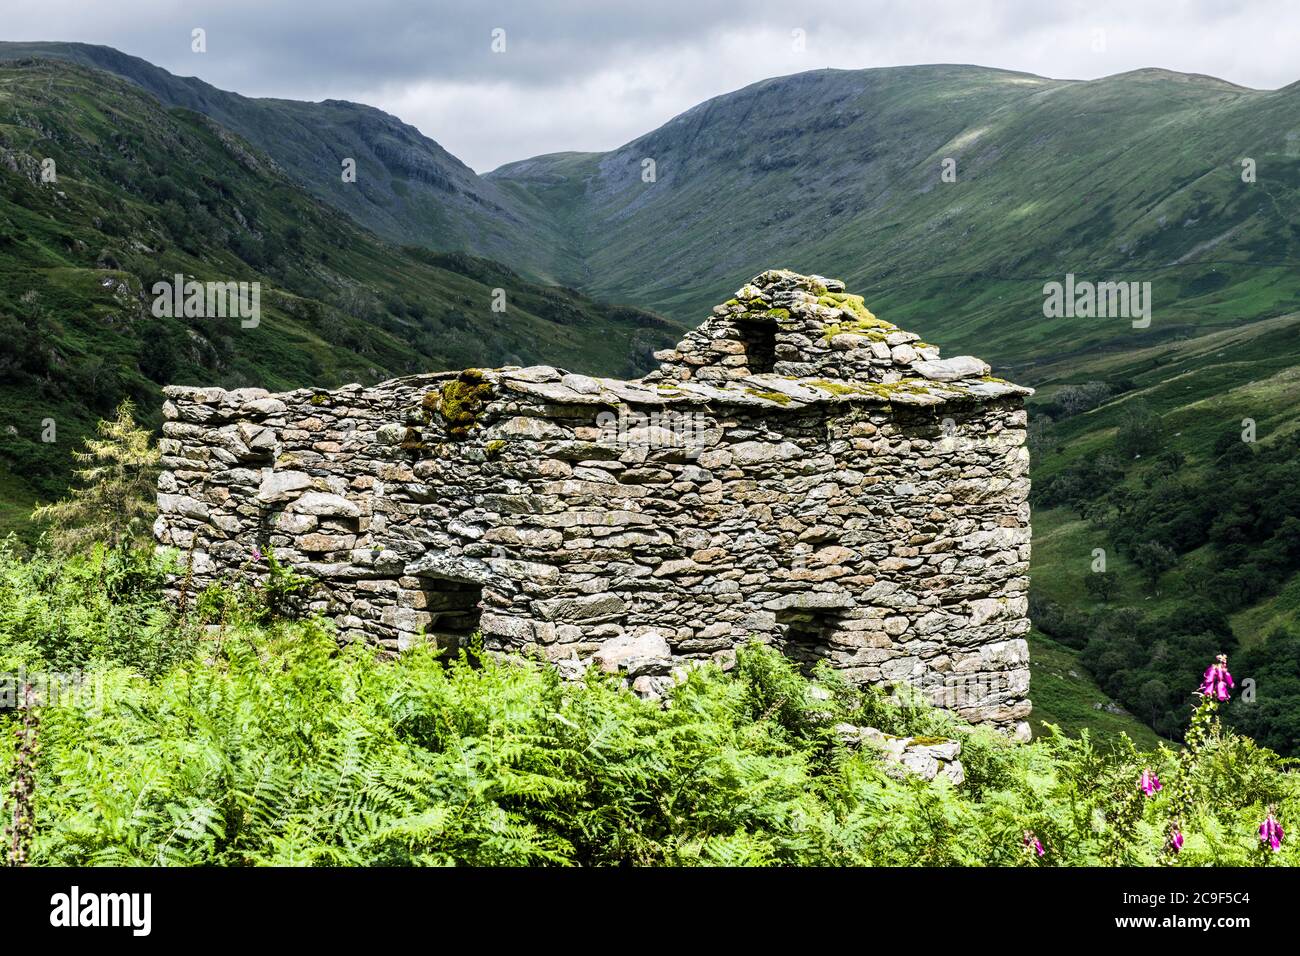 An pld and abandoned shepherd's hut high in the fells near Troutbeck in the Lake District National Park, Cumbria, North West England Stock Photo